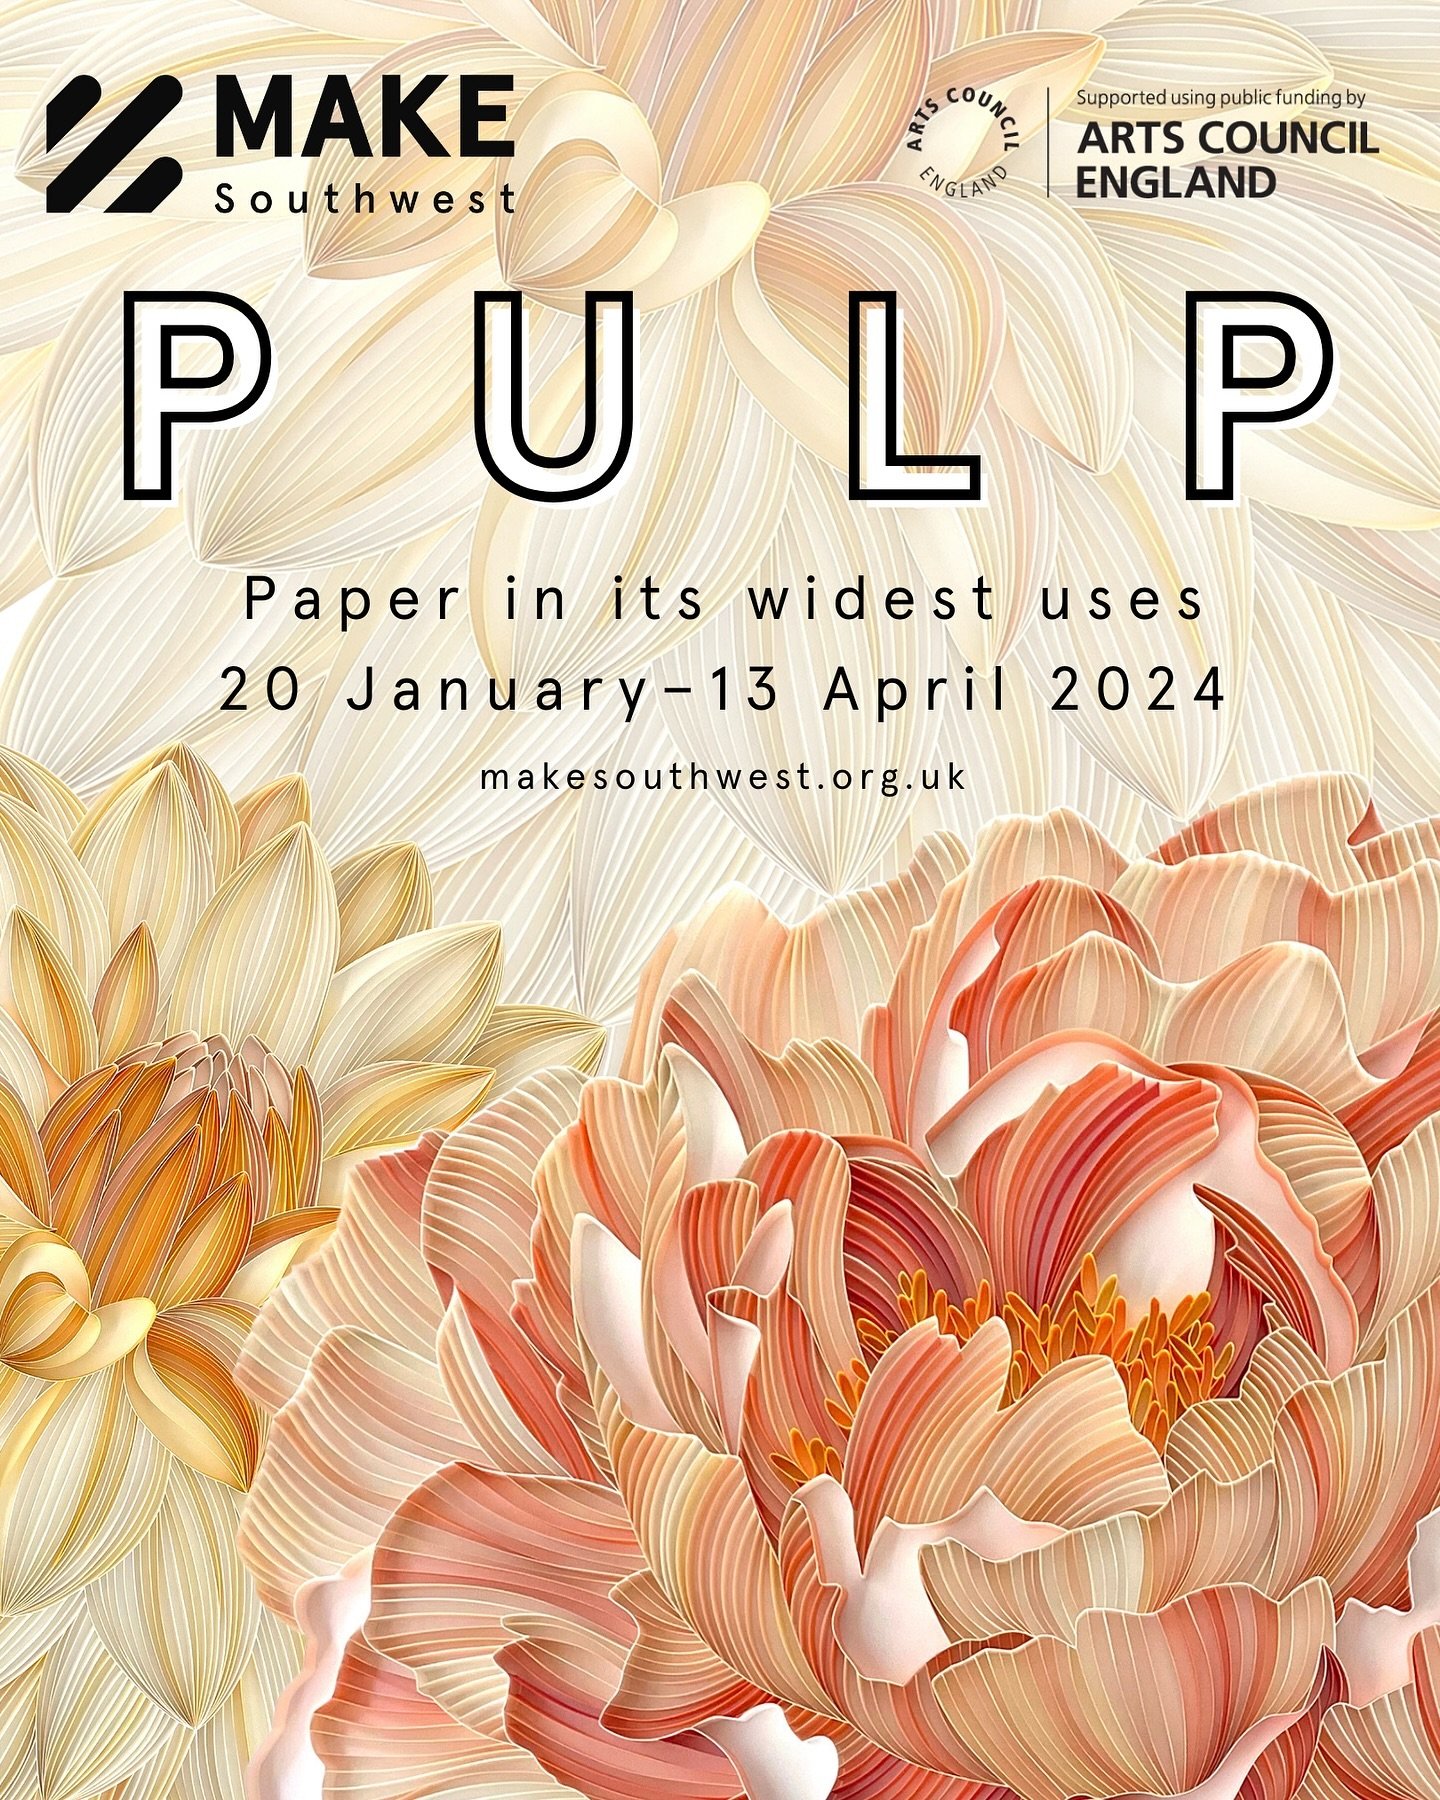 Incredibly stoked to participate in PULP, an international exhibition showcasing paper in all its forms. ENGLISH ROSE will be displayed alongside work from many other talented paper artists.
More info here: makesouthwest.org.uk/all-activity/pulp, or 